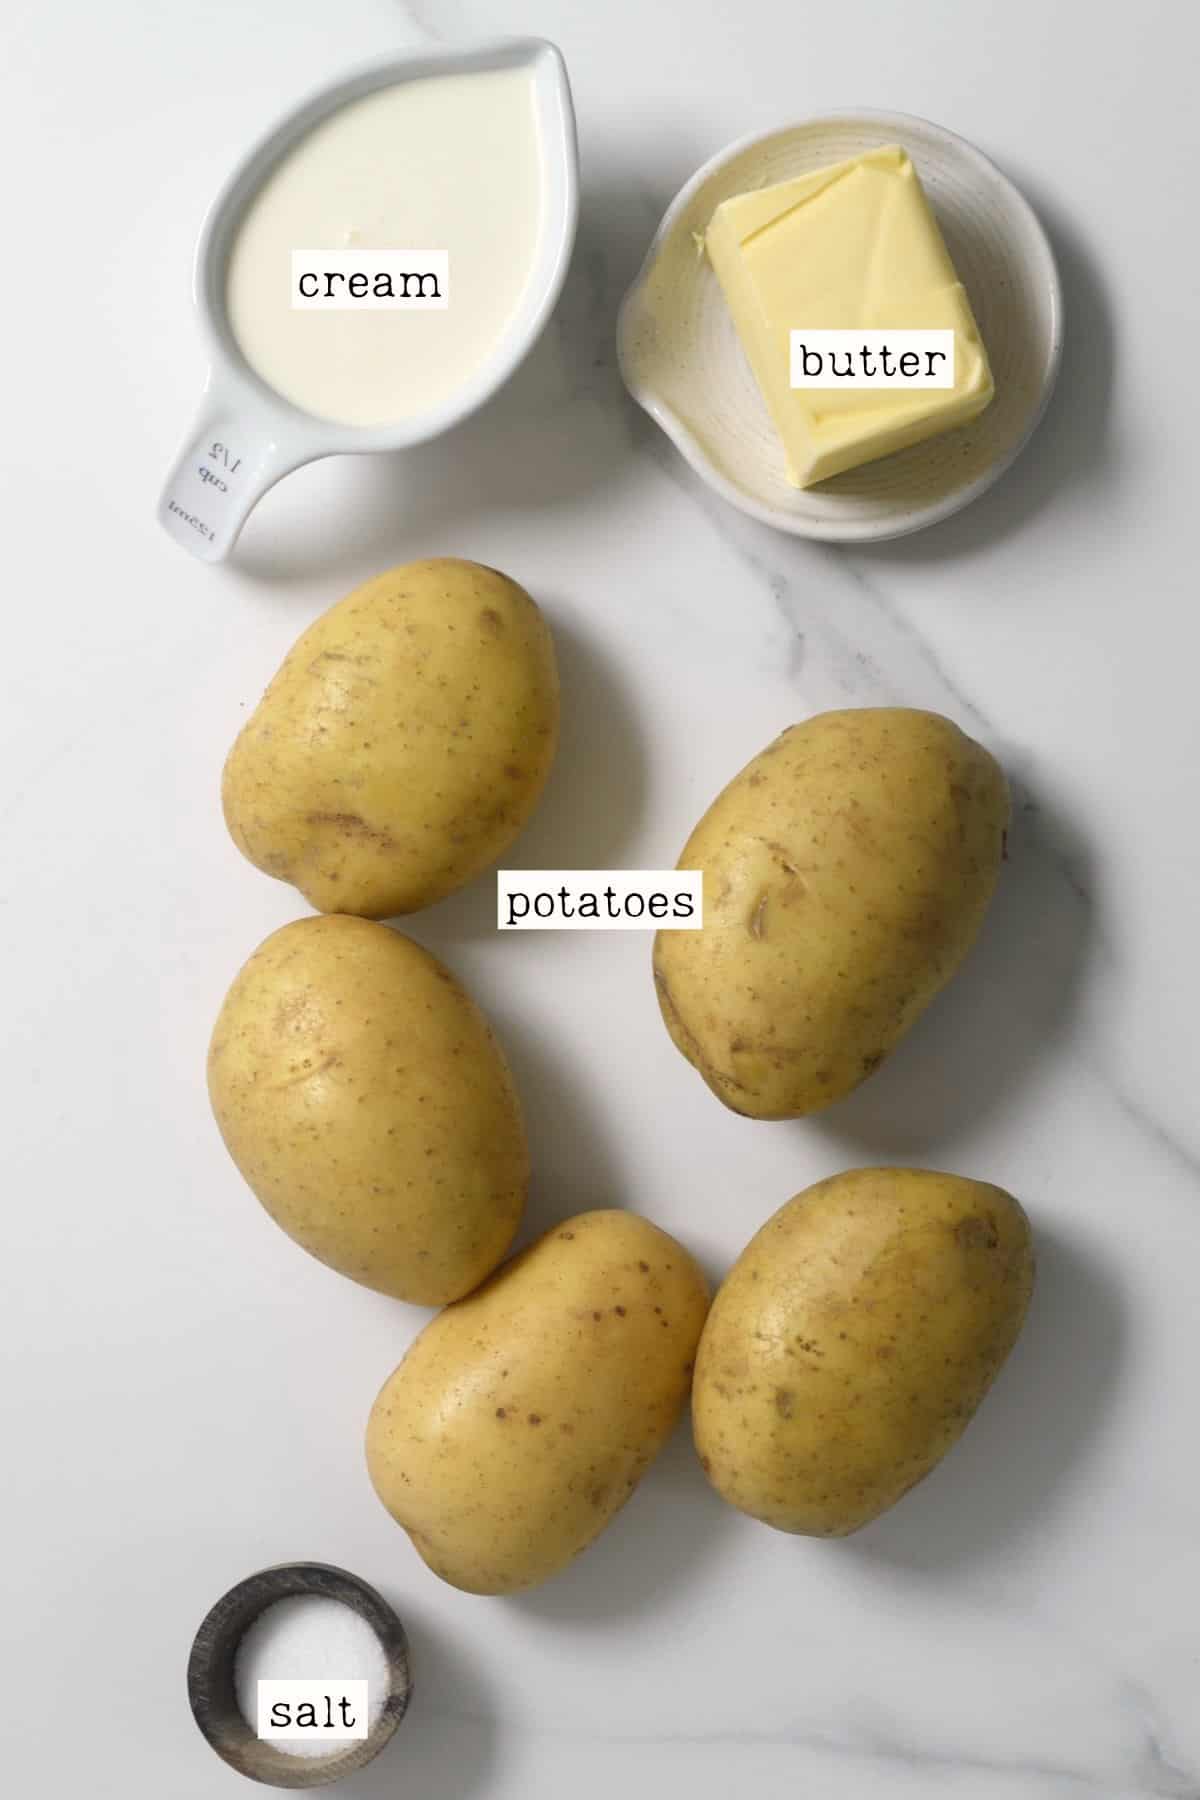 Ingredients for mashed potatoes